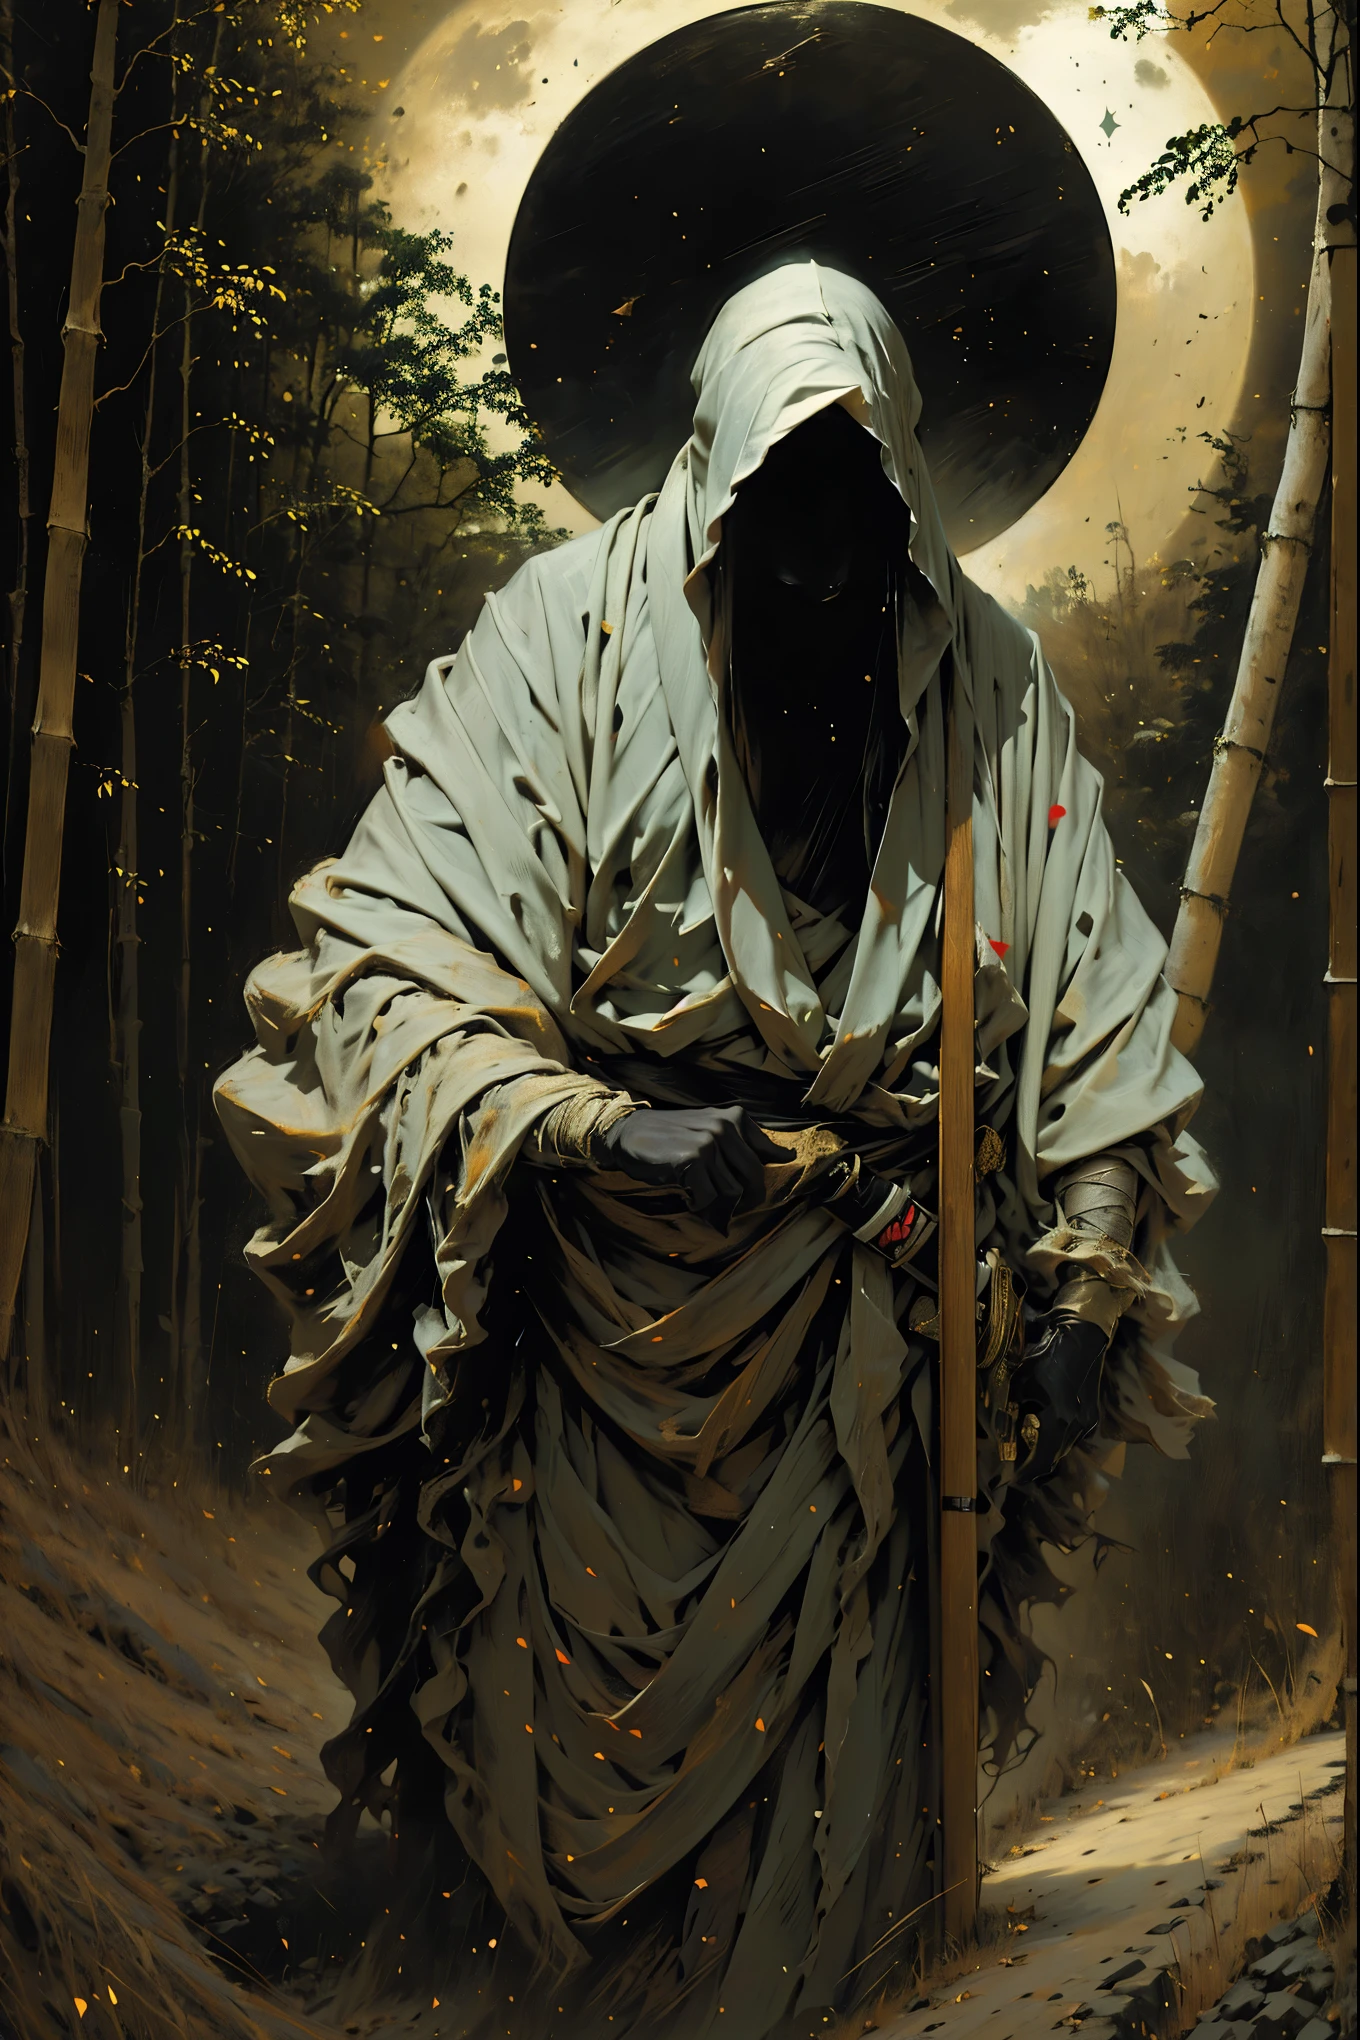 (best quality, 4k, highres, masterpiece:1.2), ultra-detailed, (realistic, photorealistic, photo-realistic:1.37), a man dressed as a samurai stands in the rain, wearing a bamboo hat (kasa) on his head. He is surrounded by a dense forest, alive with the sounds of nature. It's a moonlit night, and the darkness adds to the mysterious ambiance. The man is wearing a black kimono with neon red stripes that glow in the darkness, making him stand out in the scene. His sword (katana) is unsheathed, ready for action in the face of imminent disasters.